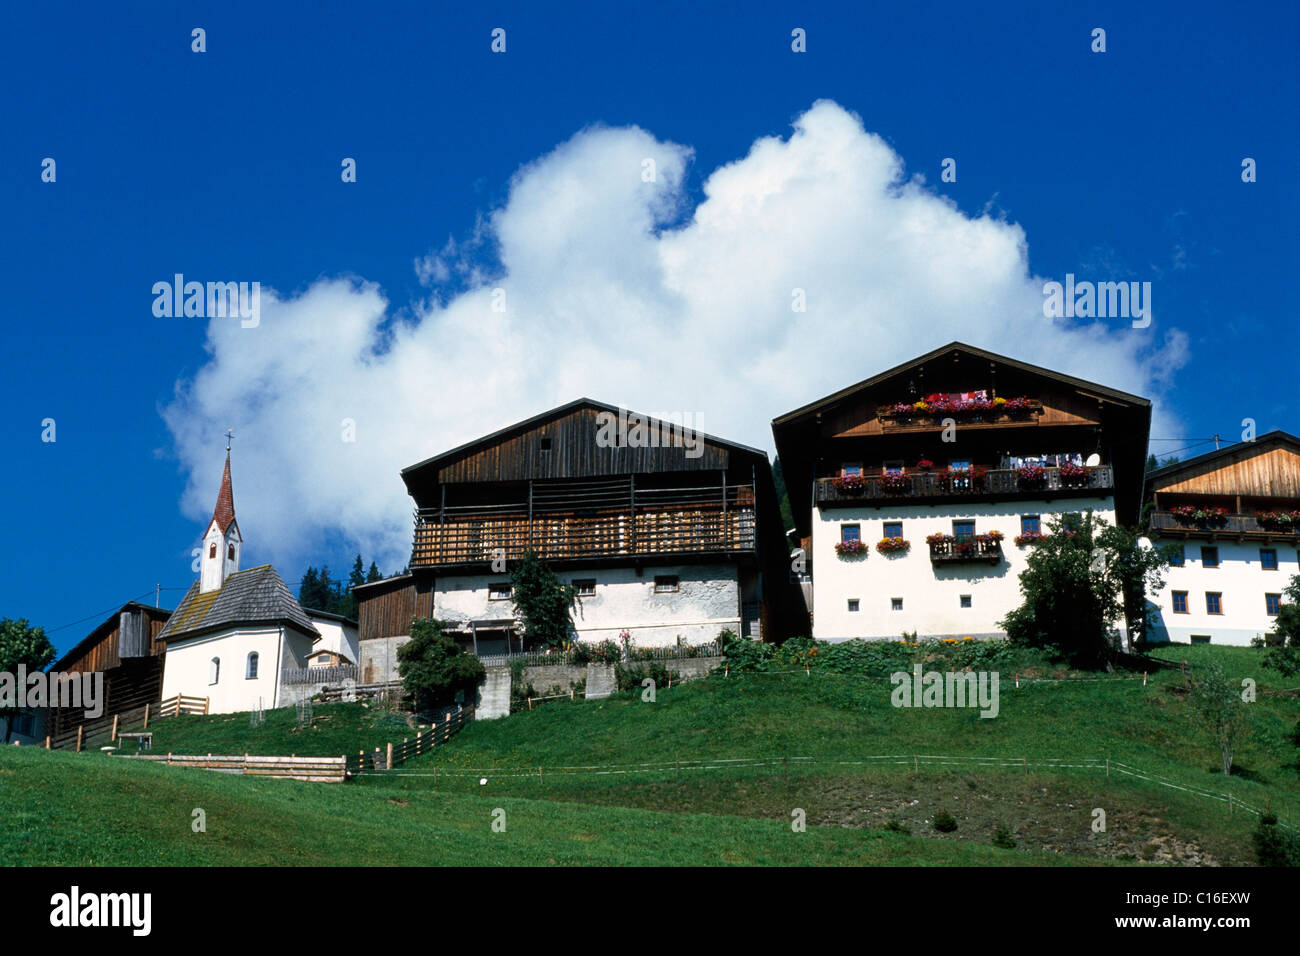 Lesachtal Valley High Resolution Stock Photography and Images - Alamy